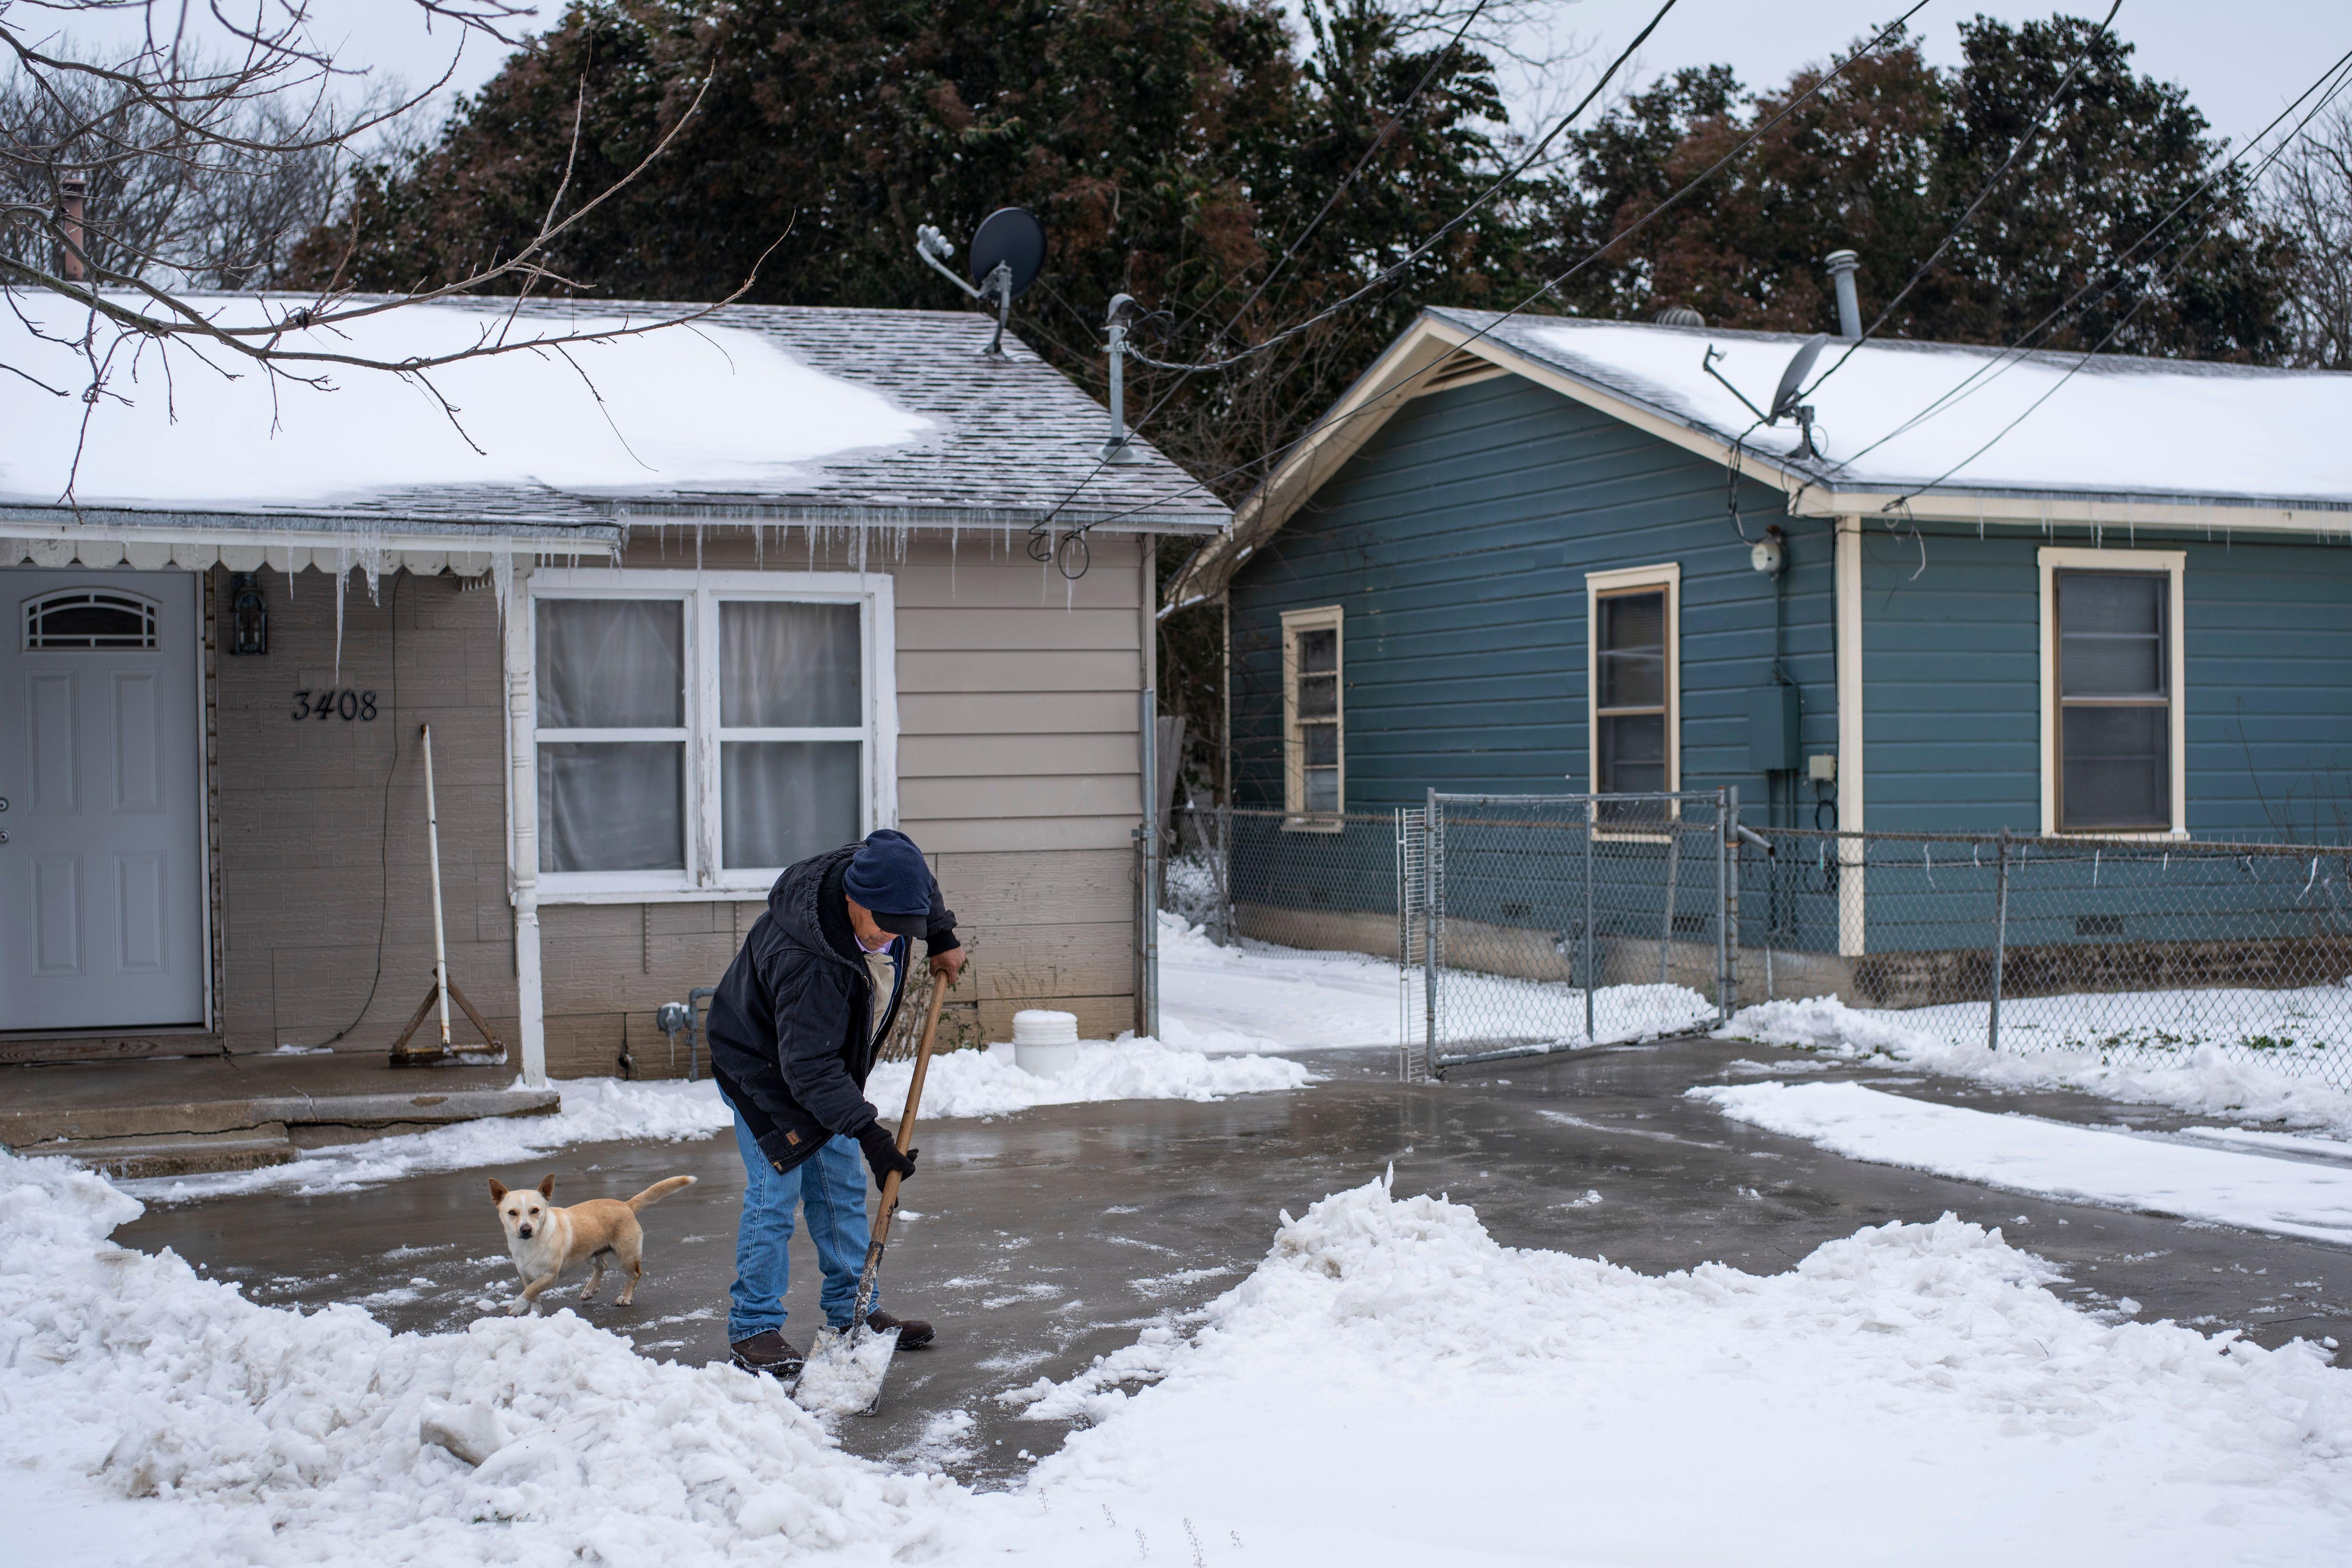 A man shovels snow from his driveway as his dog stands nearby.